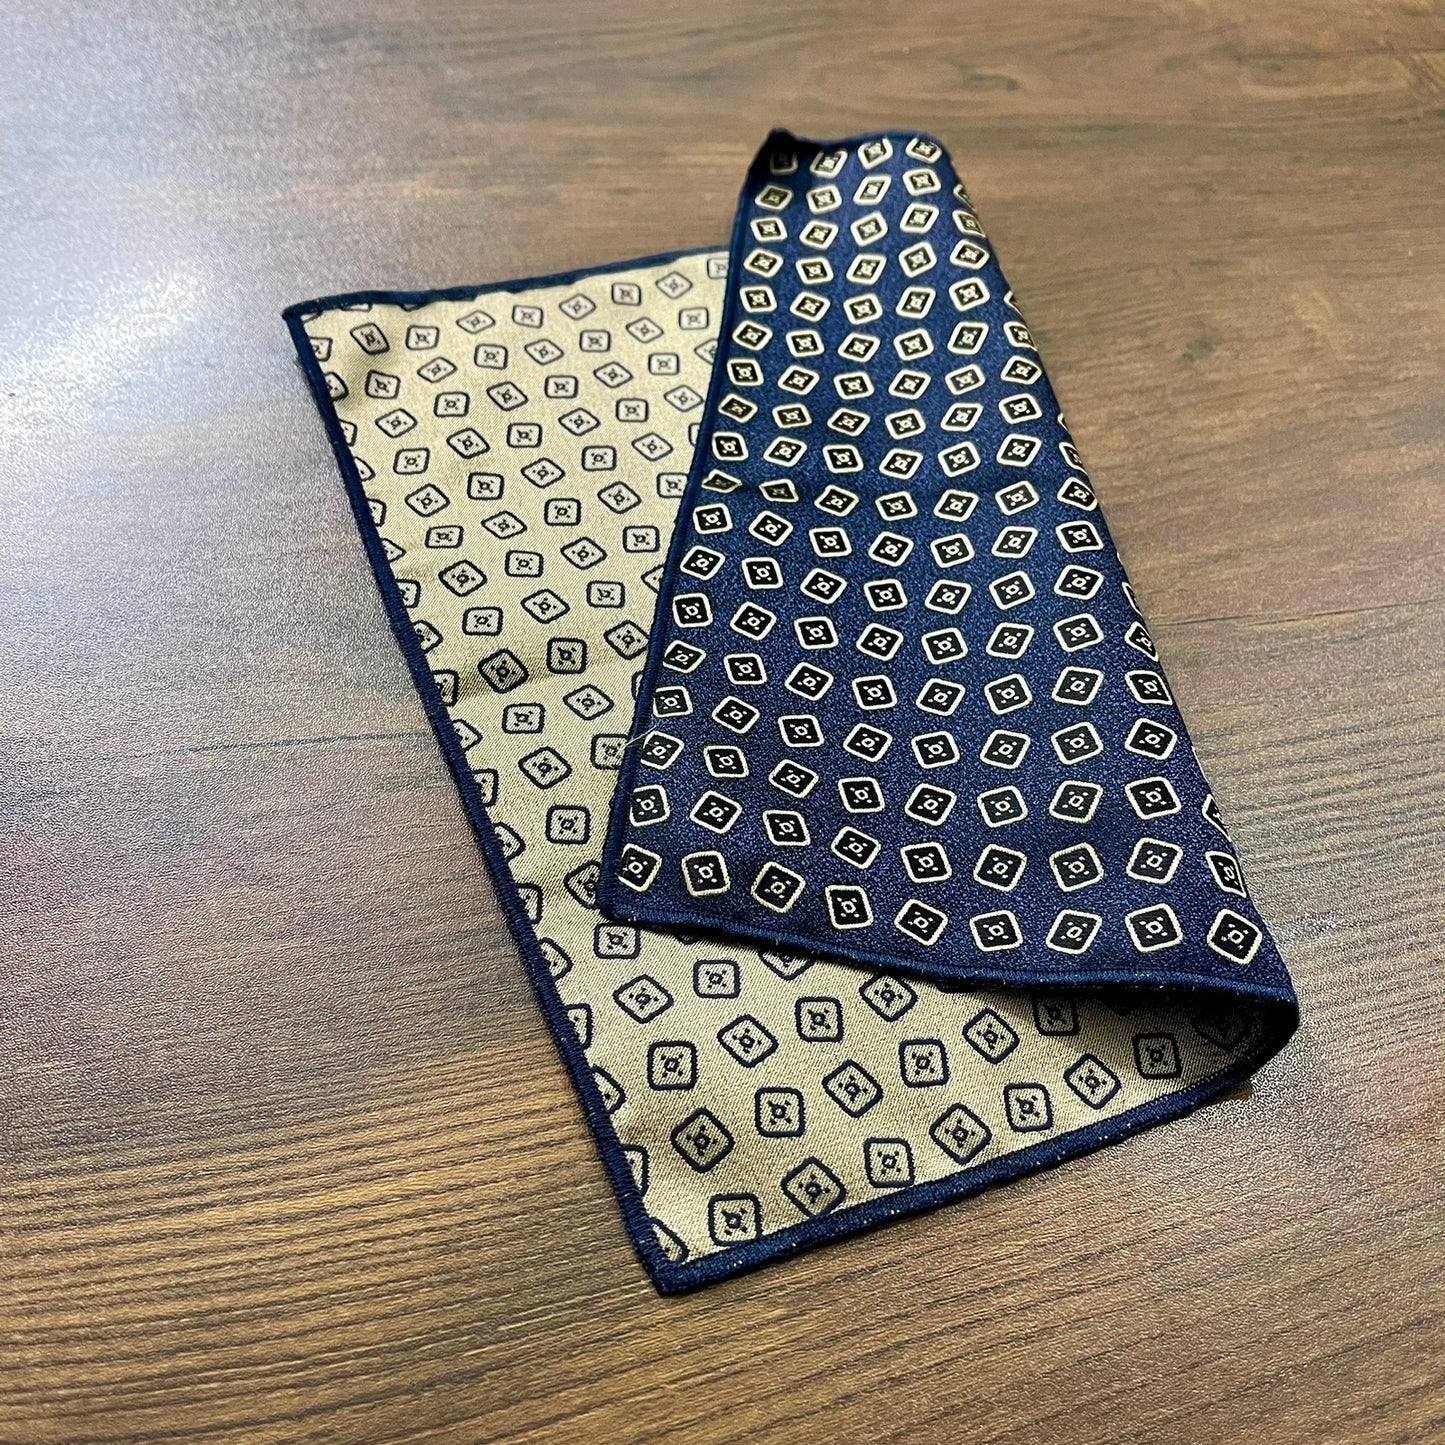 navy blue floral paisley pocket square for men in pakistan